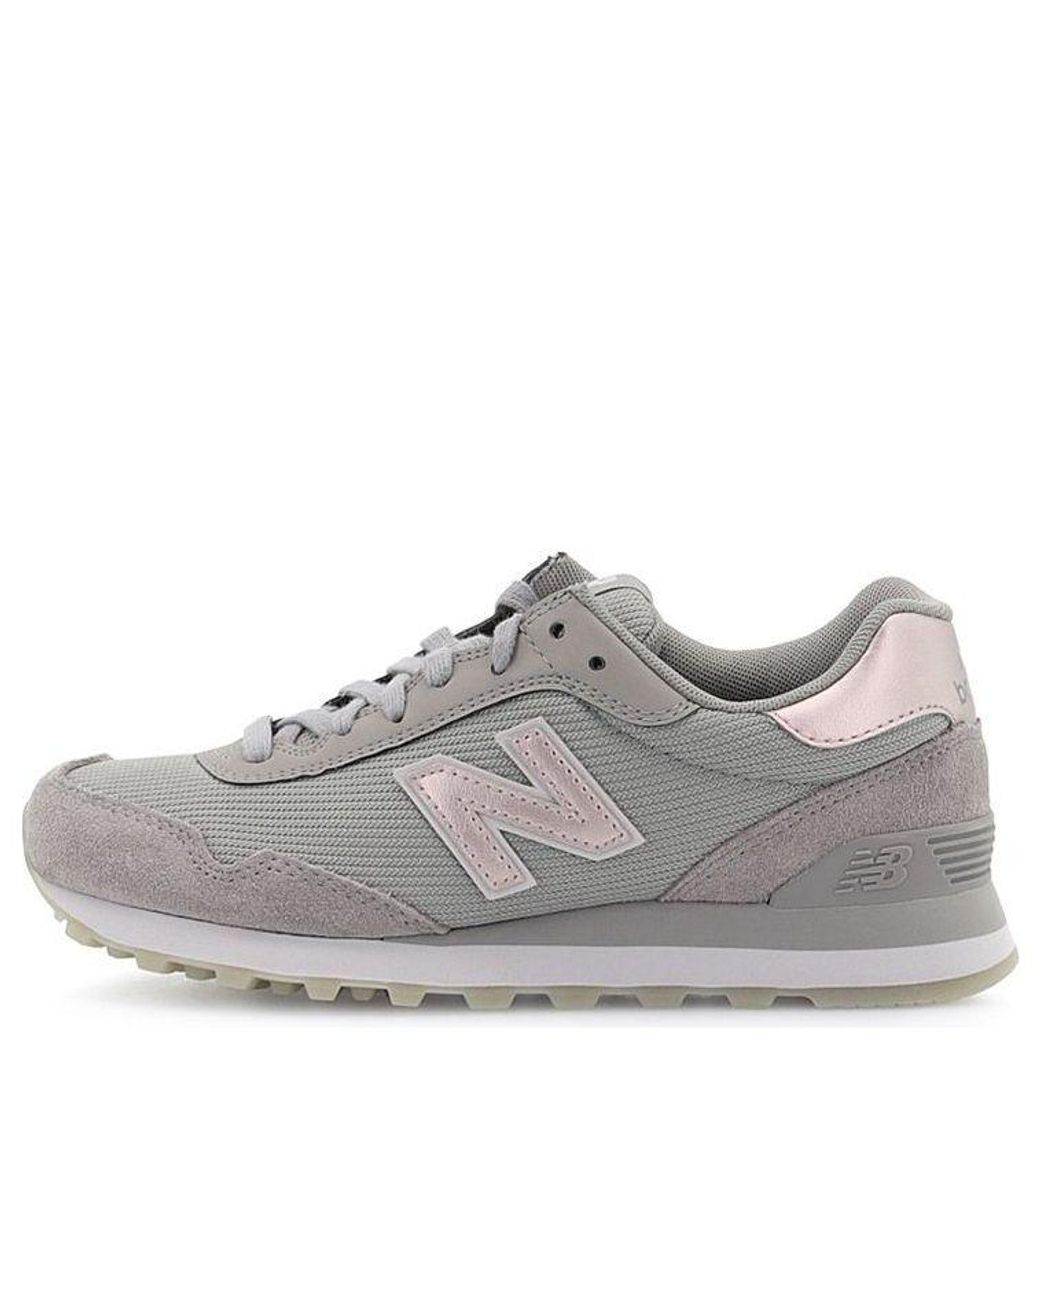 New Balance 515 Grey/pink in Gray | Lyst